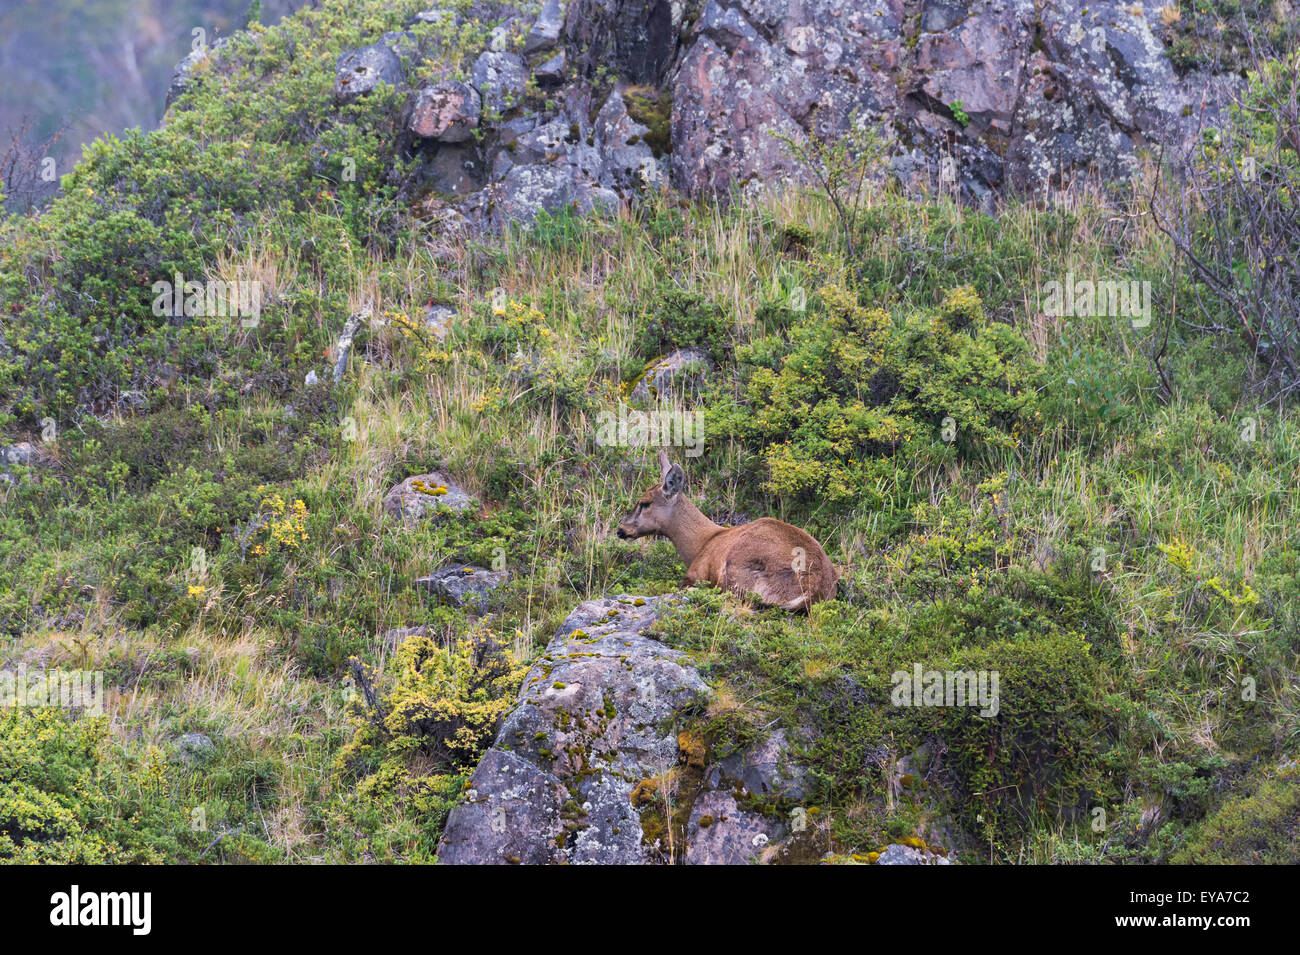 South Andean Deer (Hippocamelus bisulcus), Torres del Paine National Park, Chilean Patagonia, Chile Stock Photo